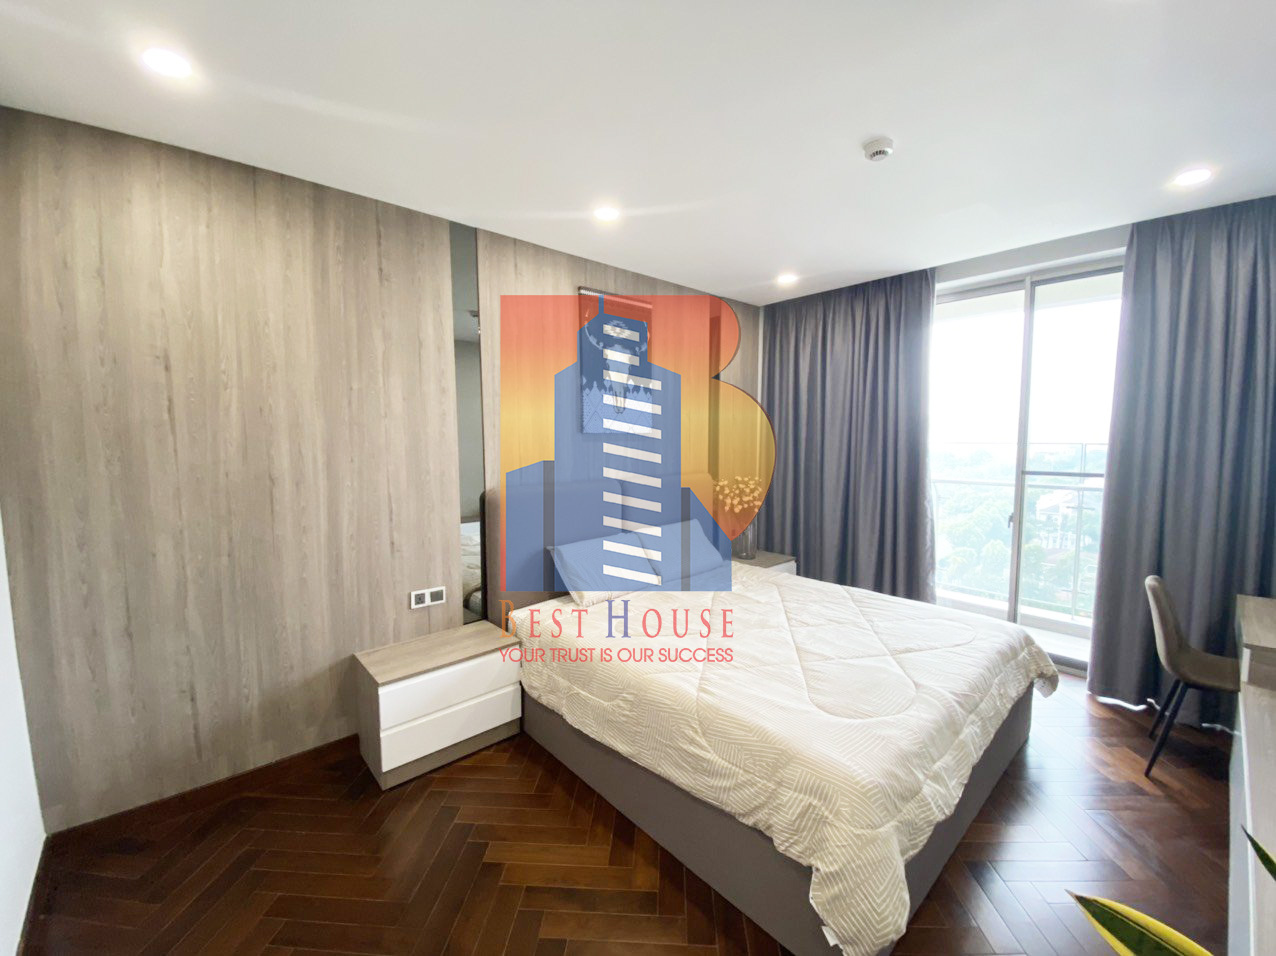 The largest area of three bedrooms in Midtown